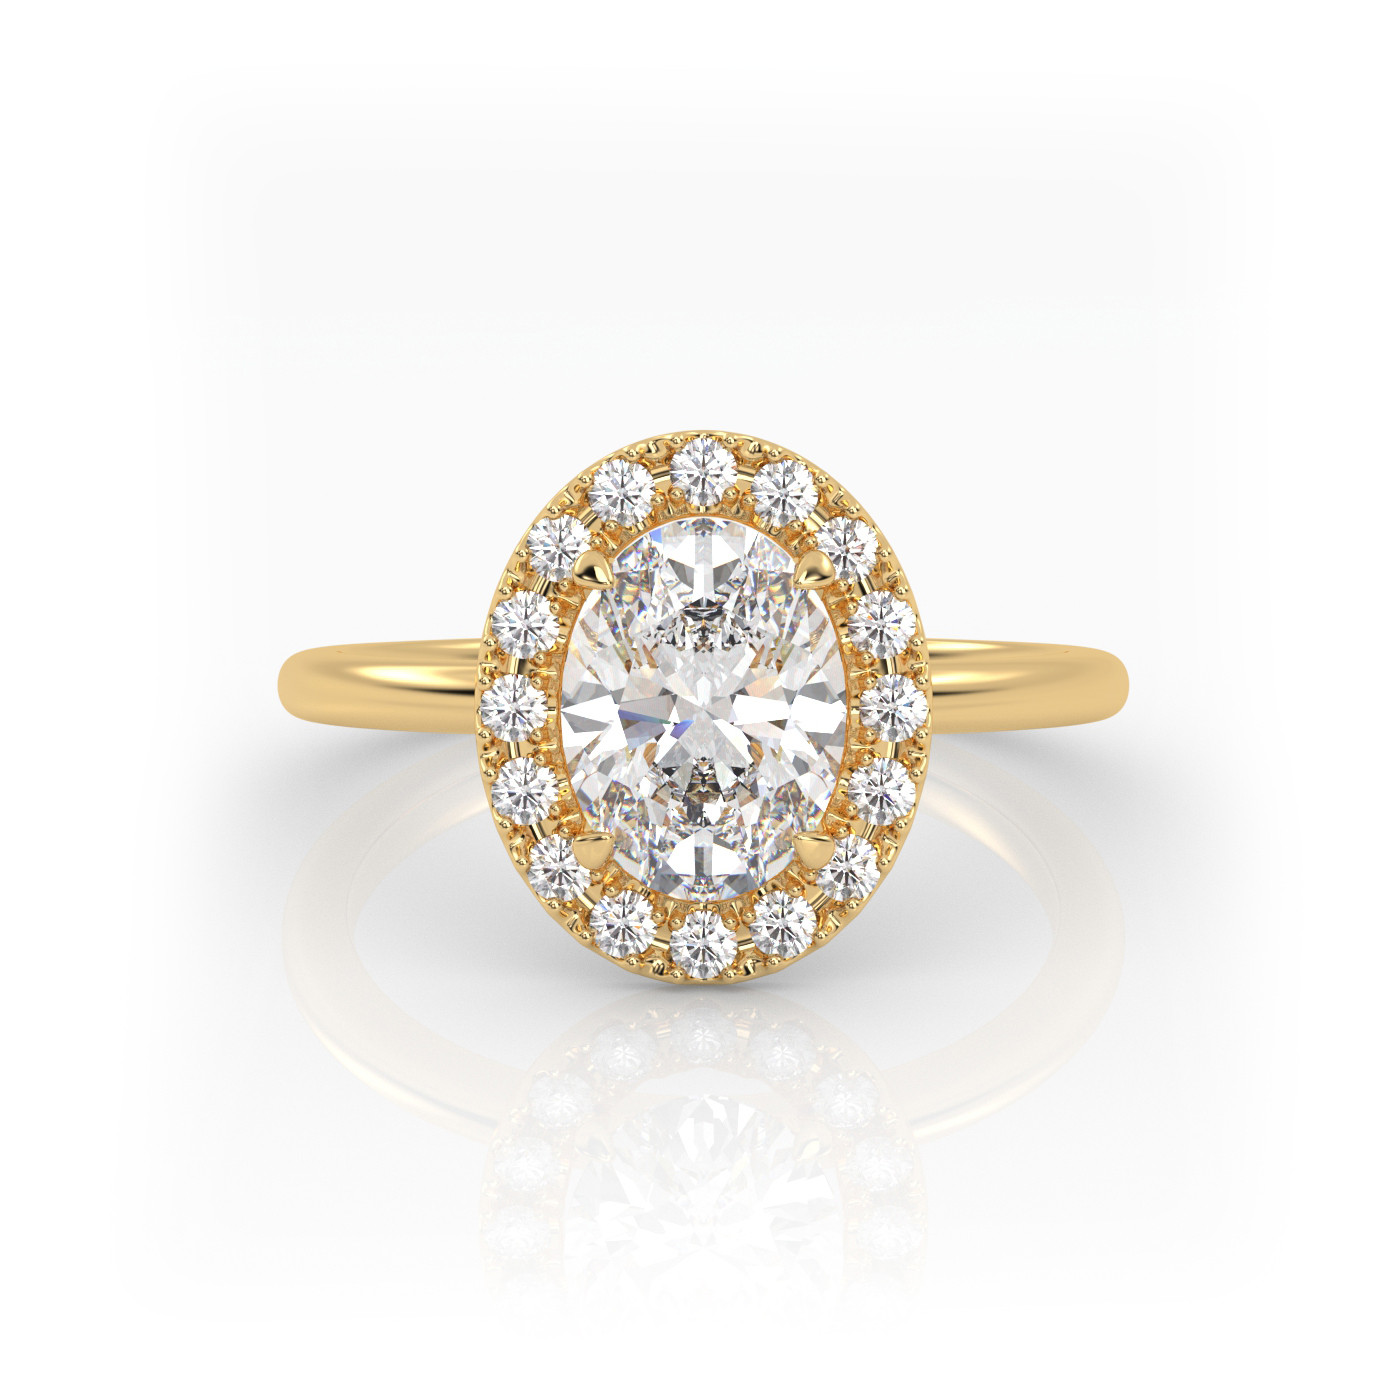 18K YELLOW GOLD Oval Diamond Engagement Ring with Halo Style